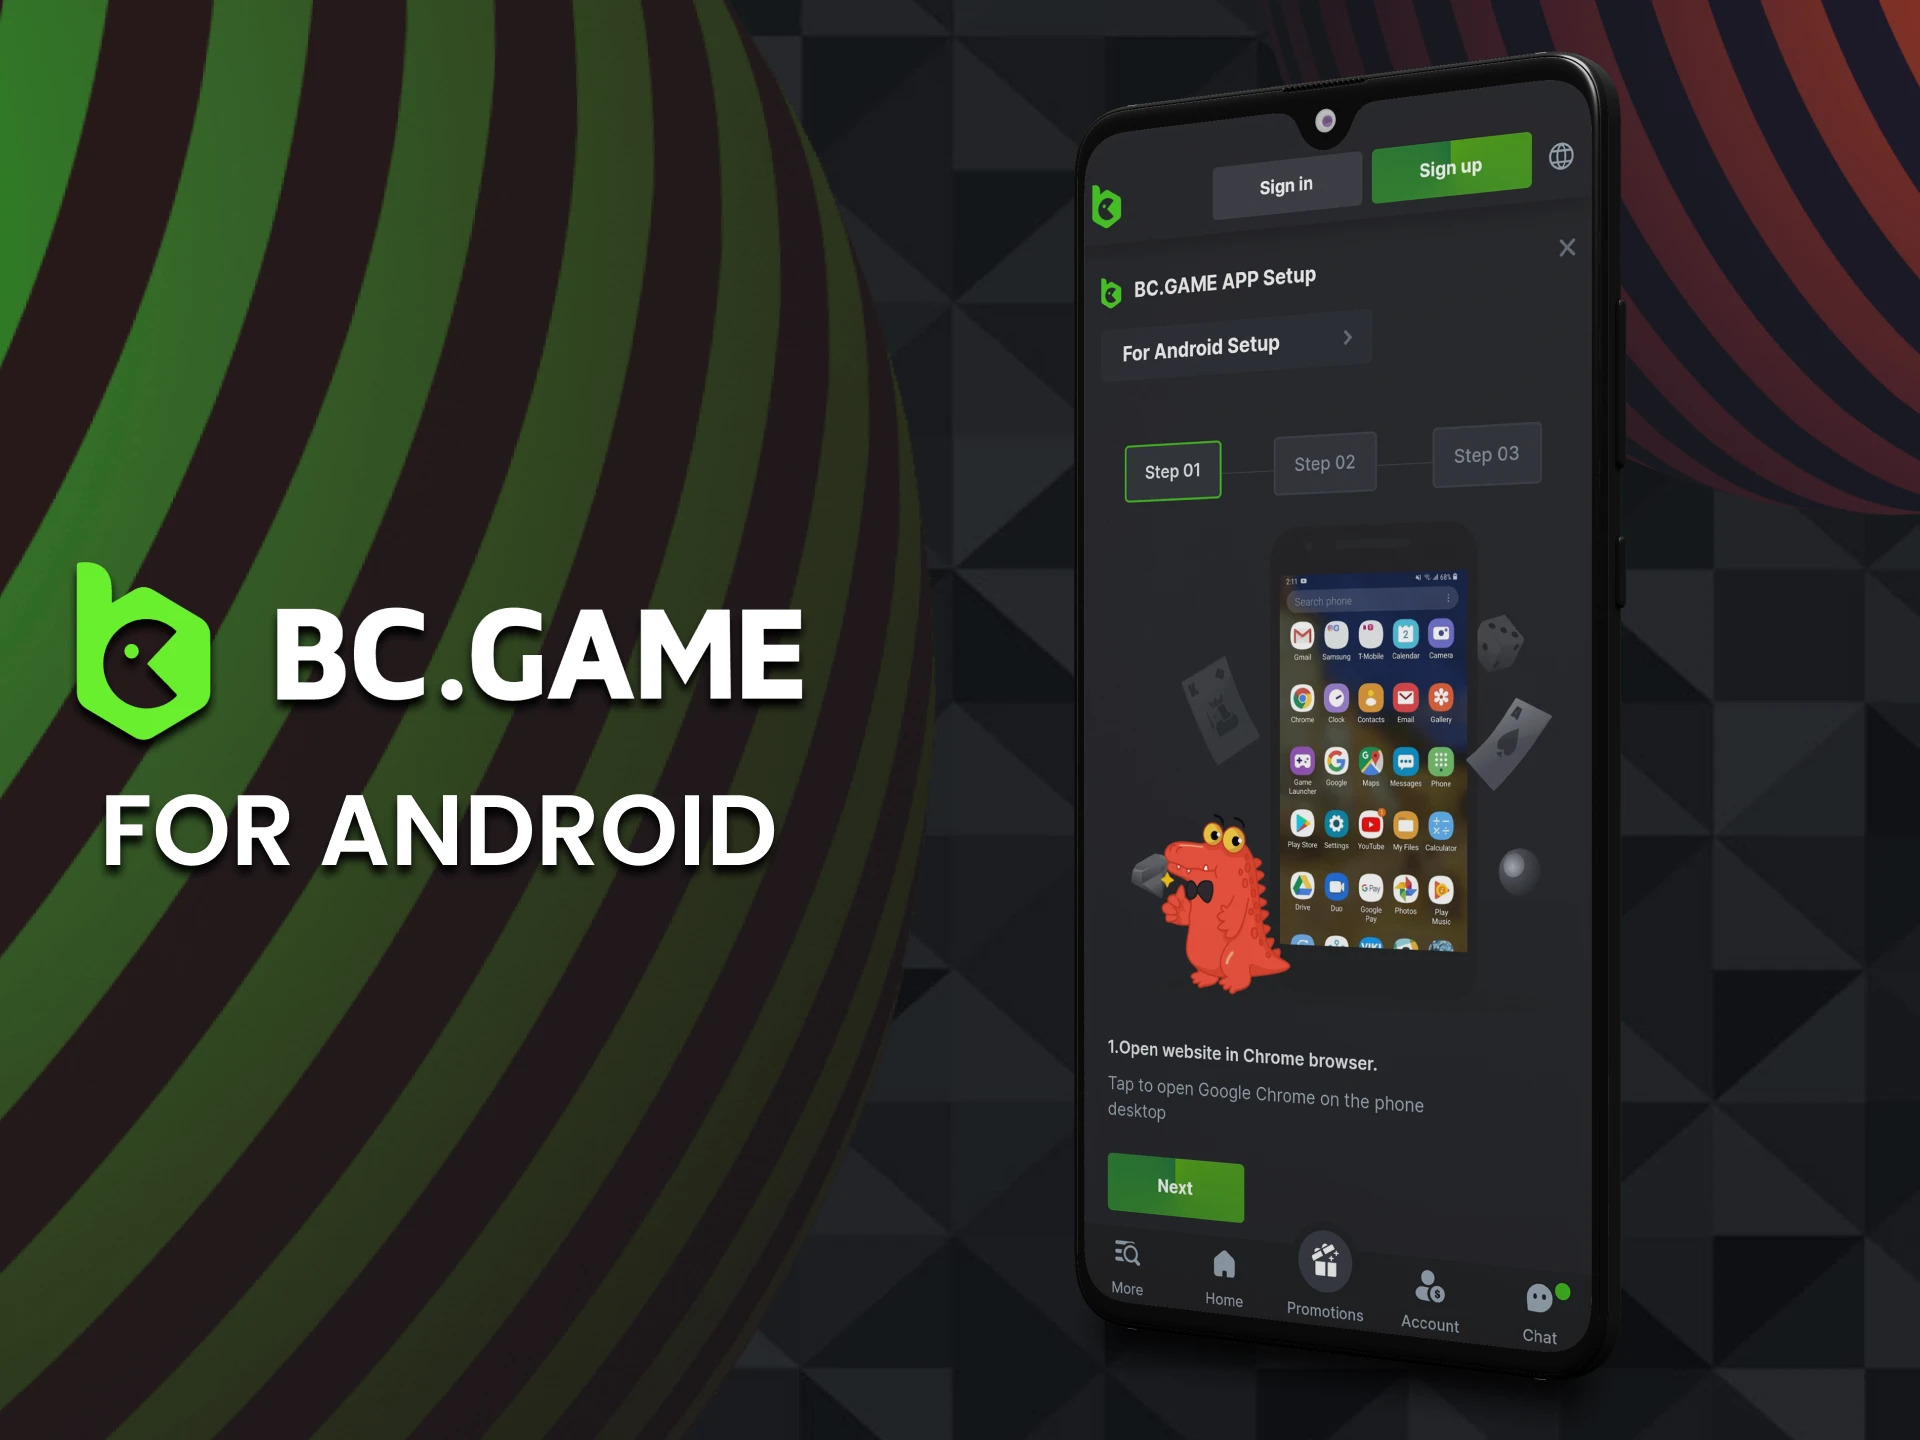 Download the BC Game app for Android.